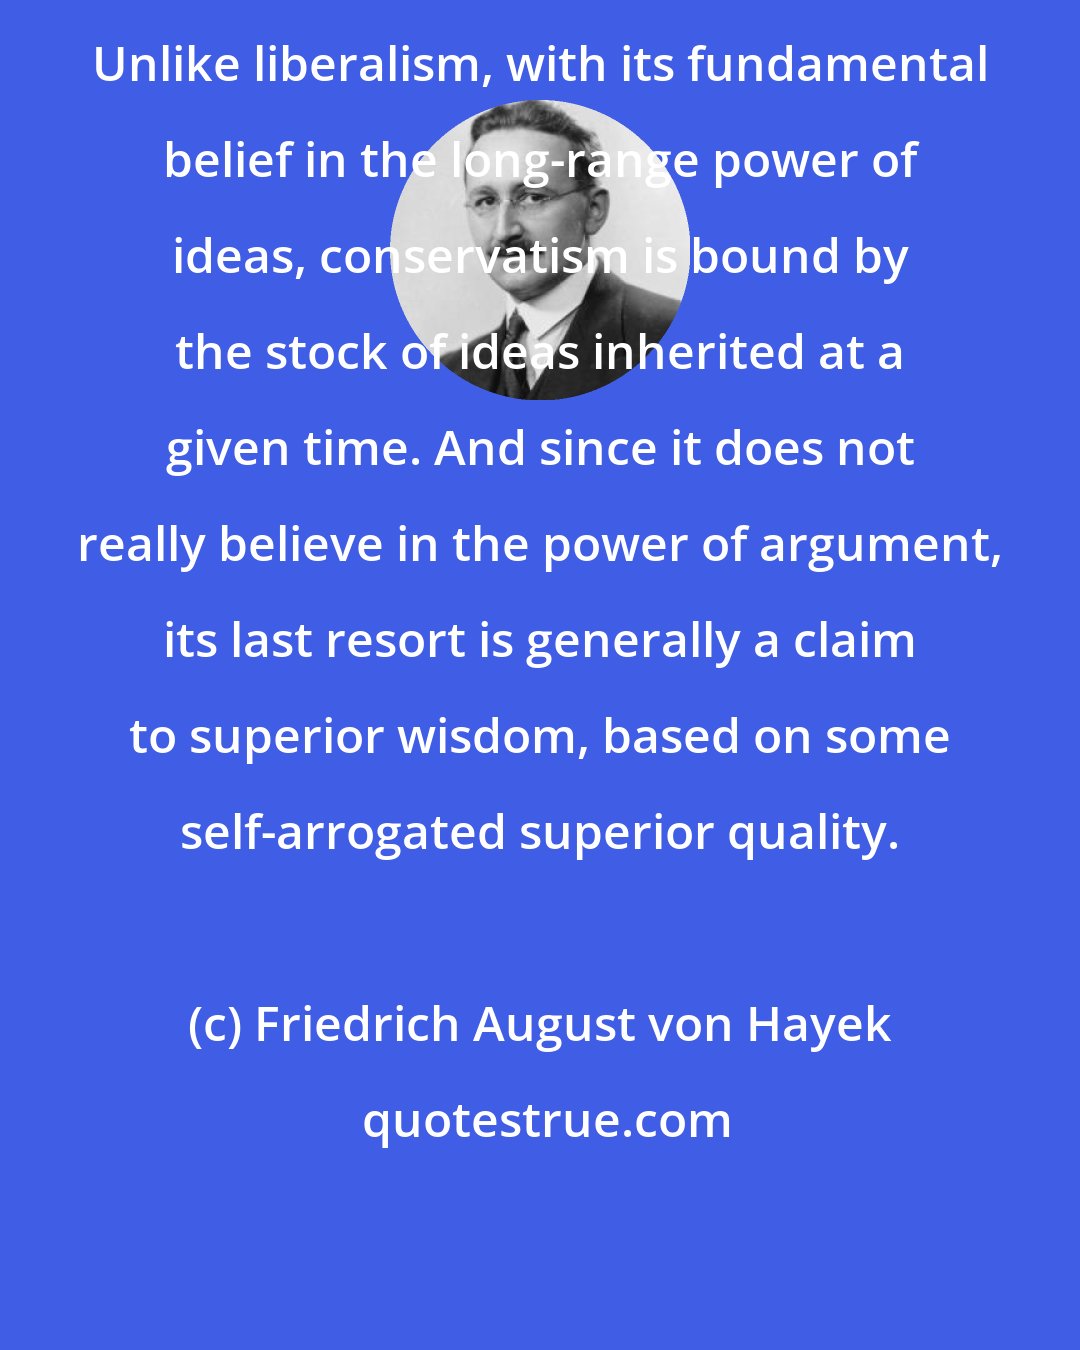 Friedrich August von Hayek: Unlike liberalism, with its fundamental belief in the long-range power of ideas, conservatism is bound by the stock of ideas inherited at a given time. And since it does not really believe in the power of argument, its last resort is generally a claim to superior wisdom, based on some self-arrogated superior quality.